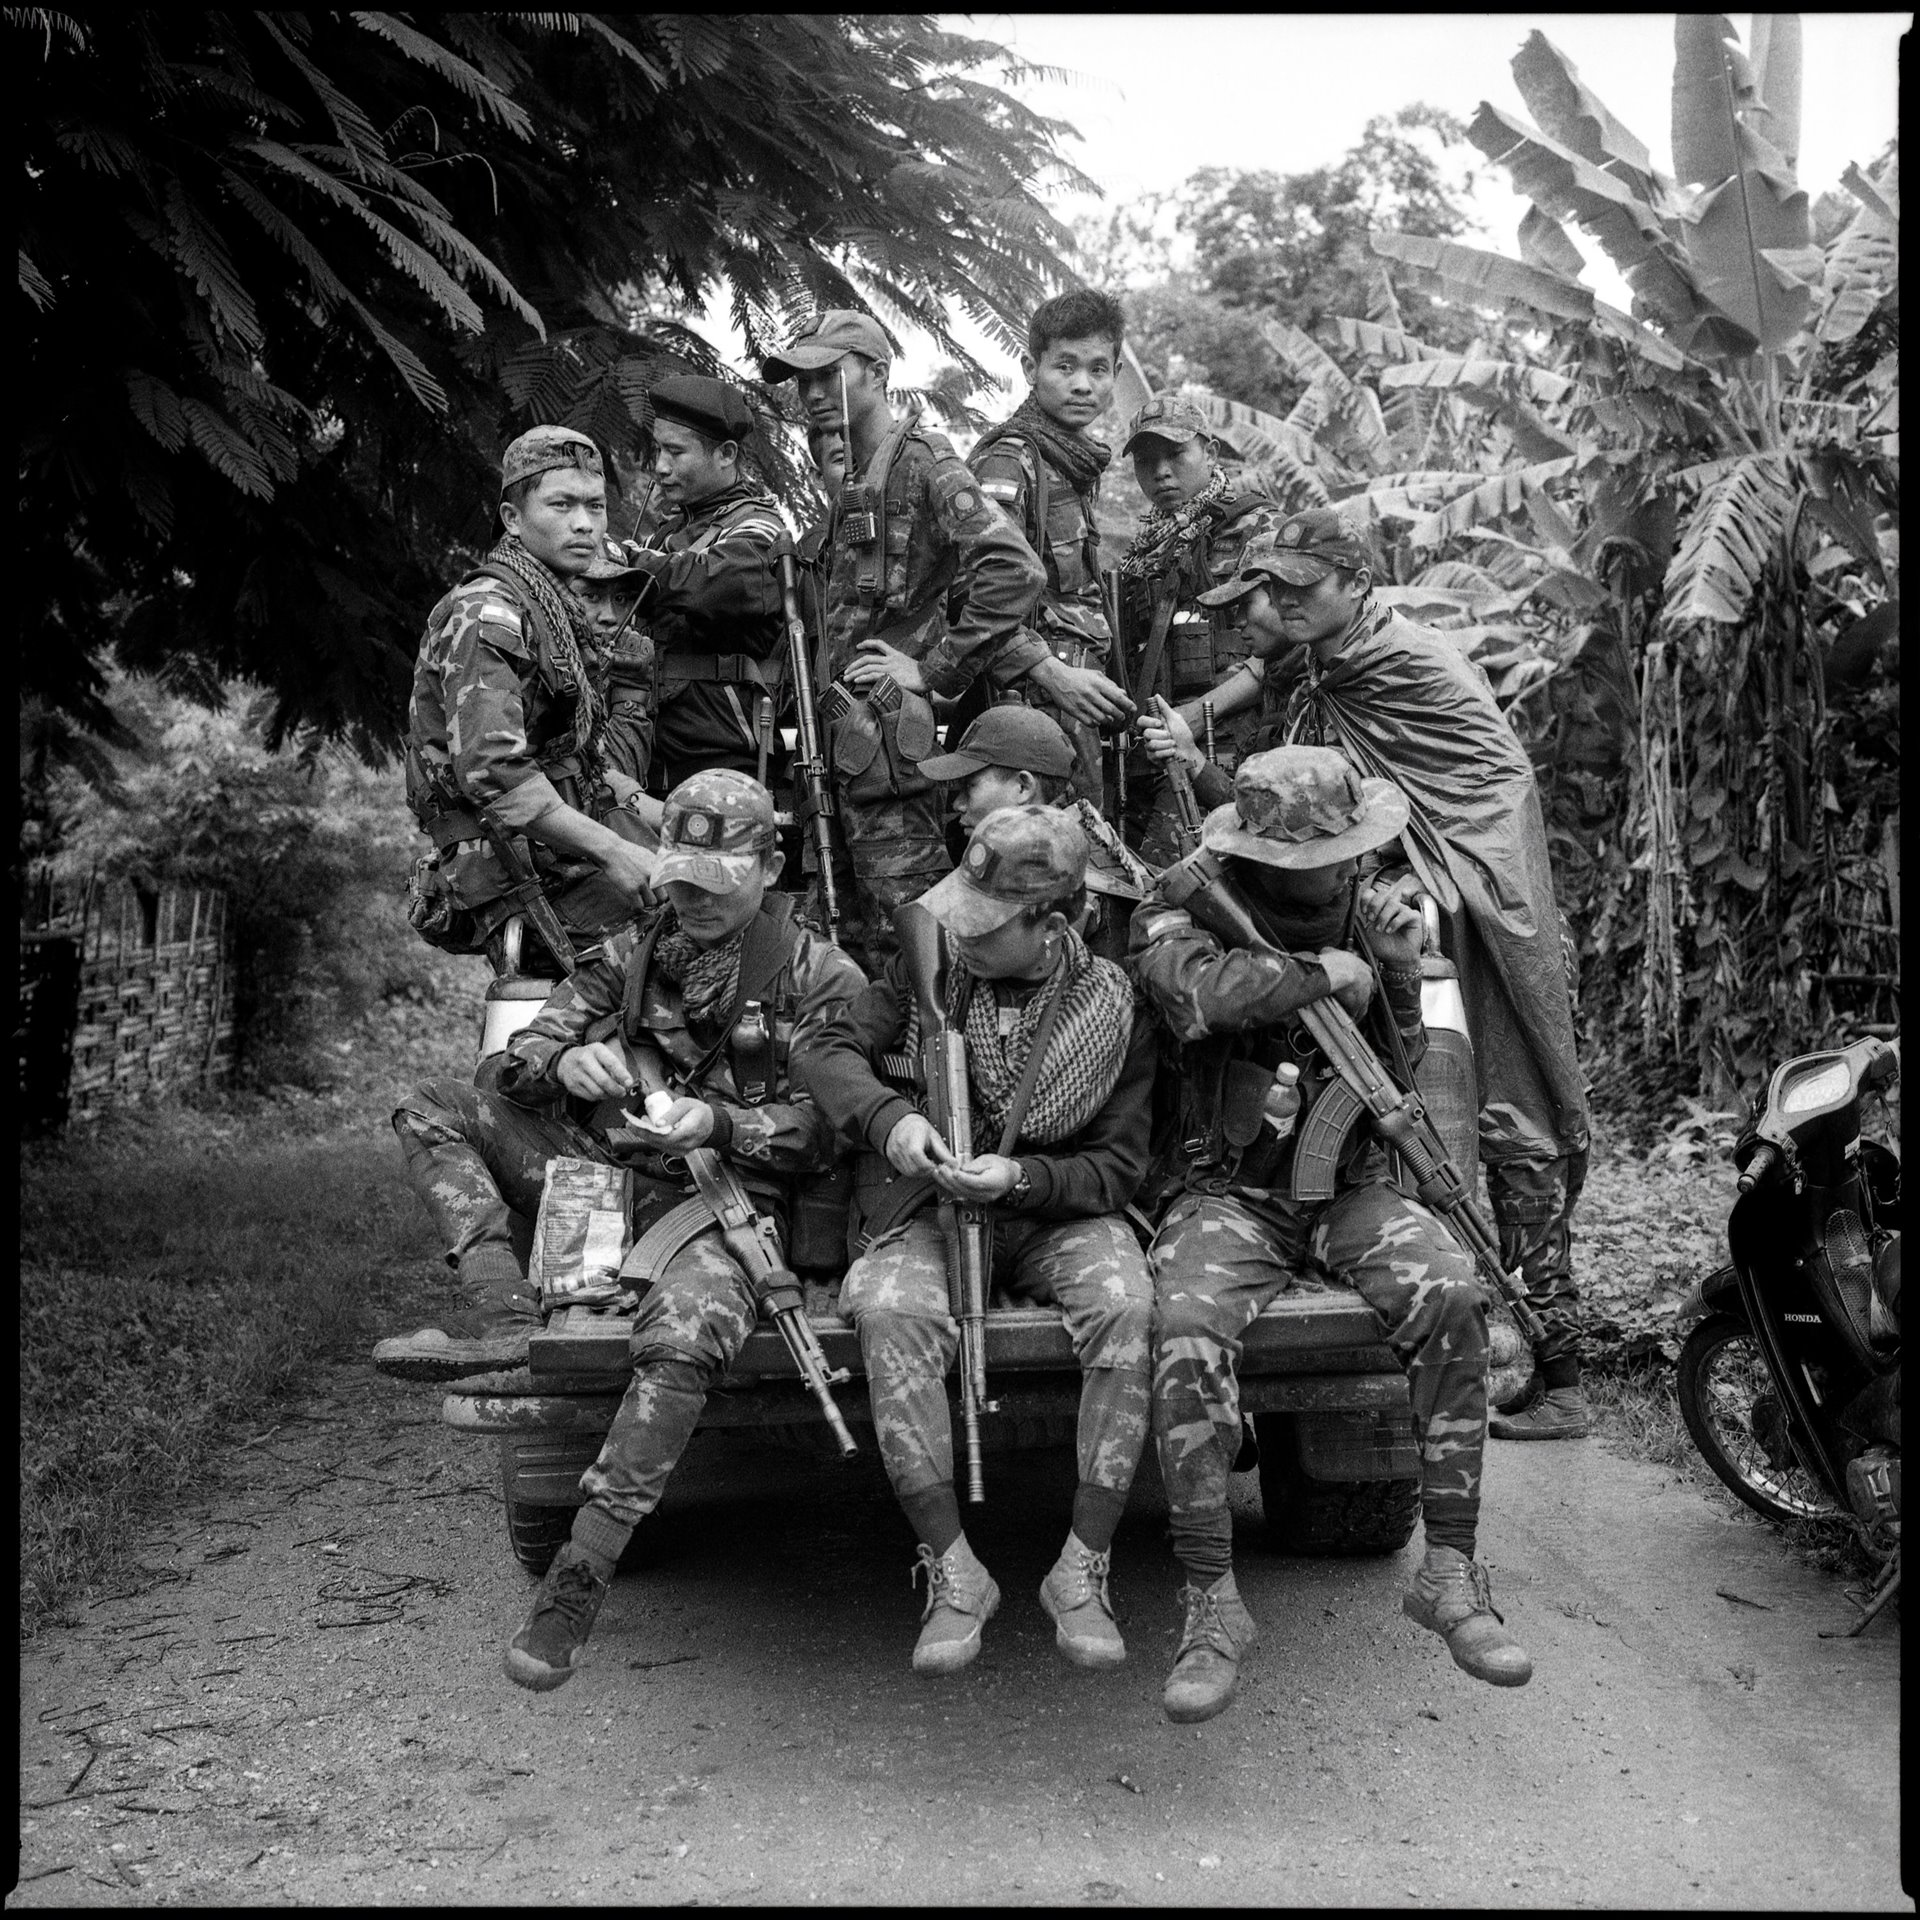 Members of the Karenni Nationalities Defense Force (KNDF) prepare to go to the front line, in Demoso, Kayah (Karenni) State, Myanmar.